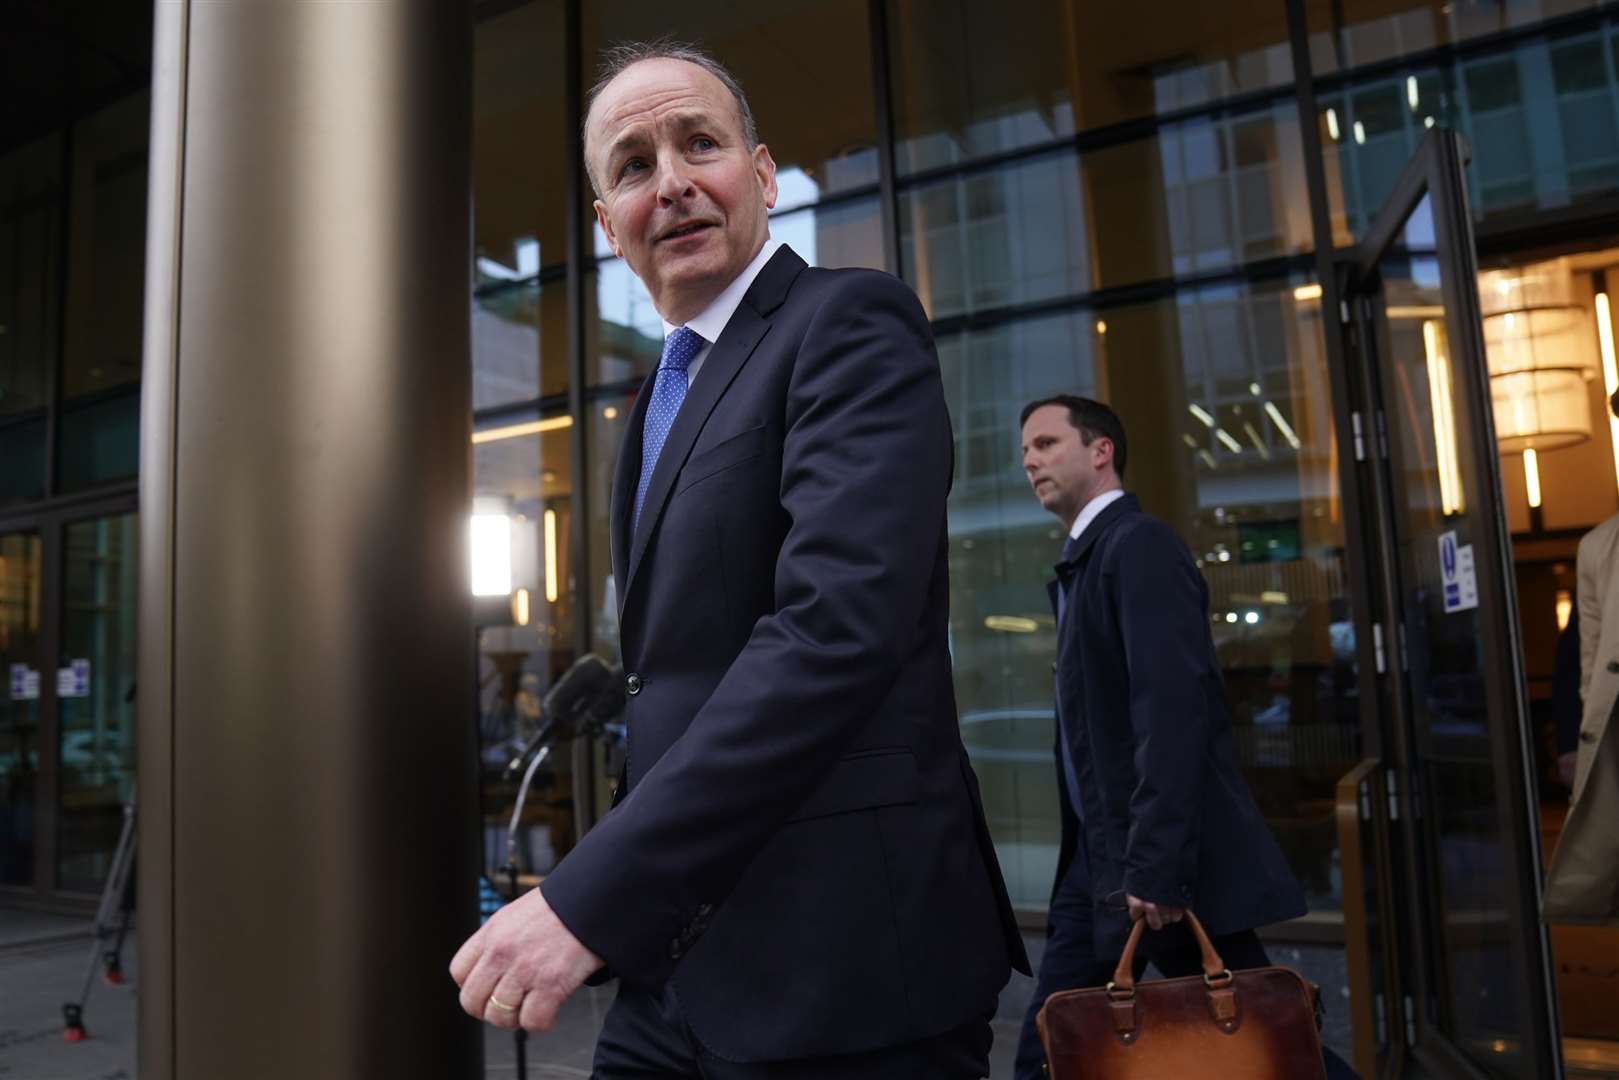 Tanaiste Micheal Martin leaves a Belfast hotel after holding meeting with Stormont parties earlier this month (Brian Lawless/PA)